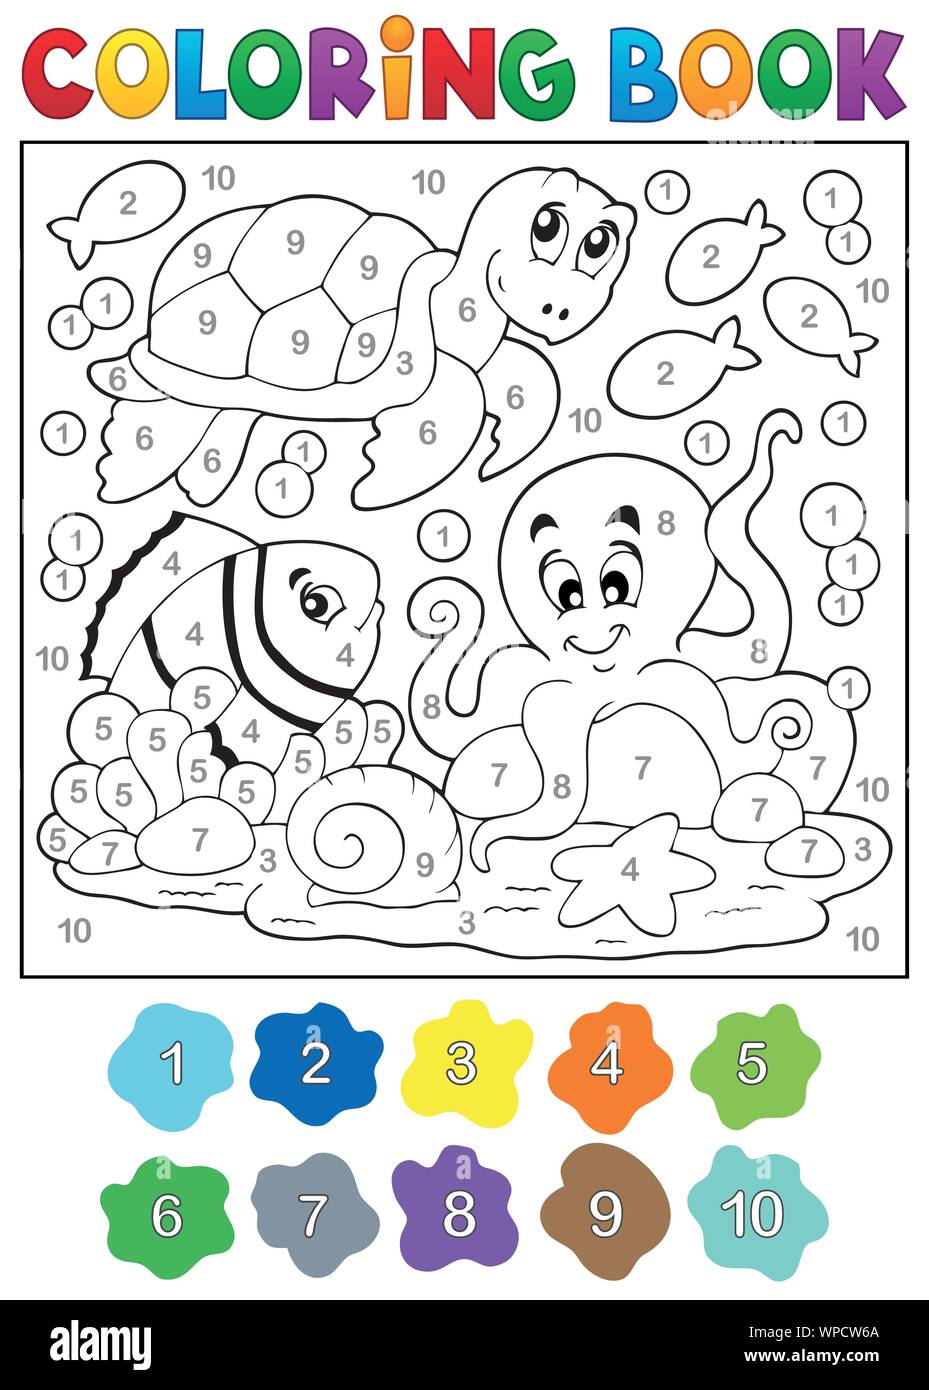 Coloring book with sea animals 4 Stock Vector